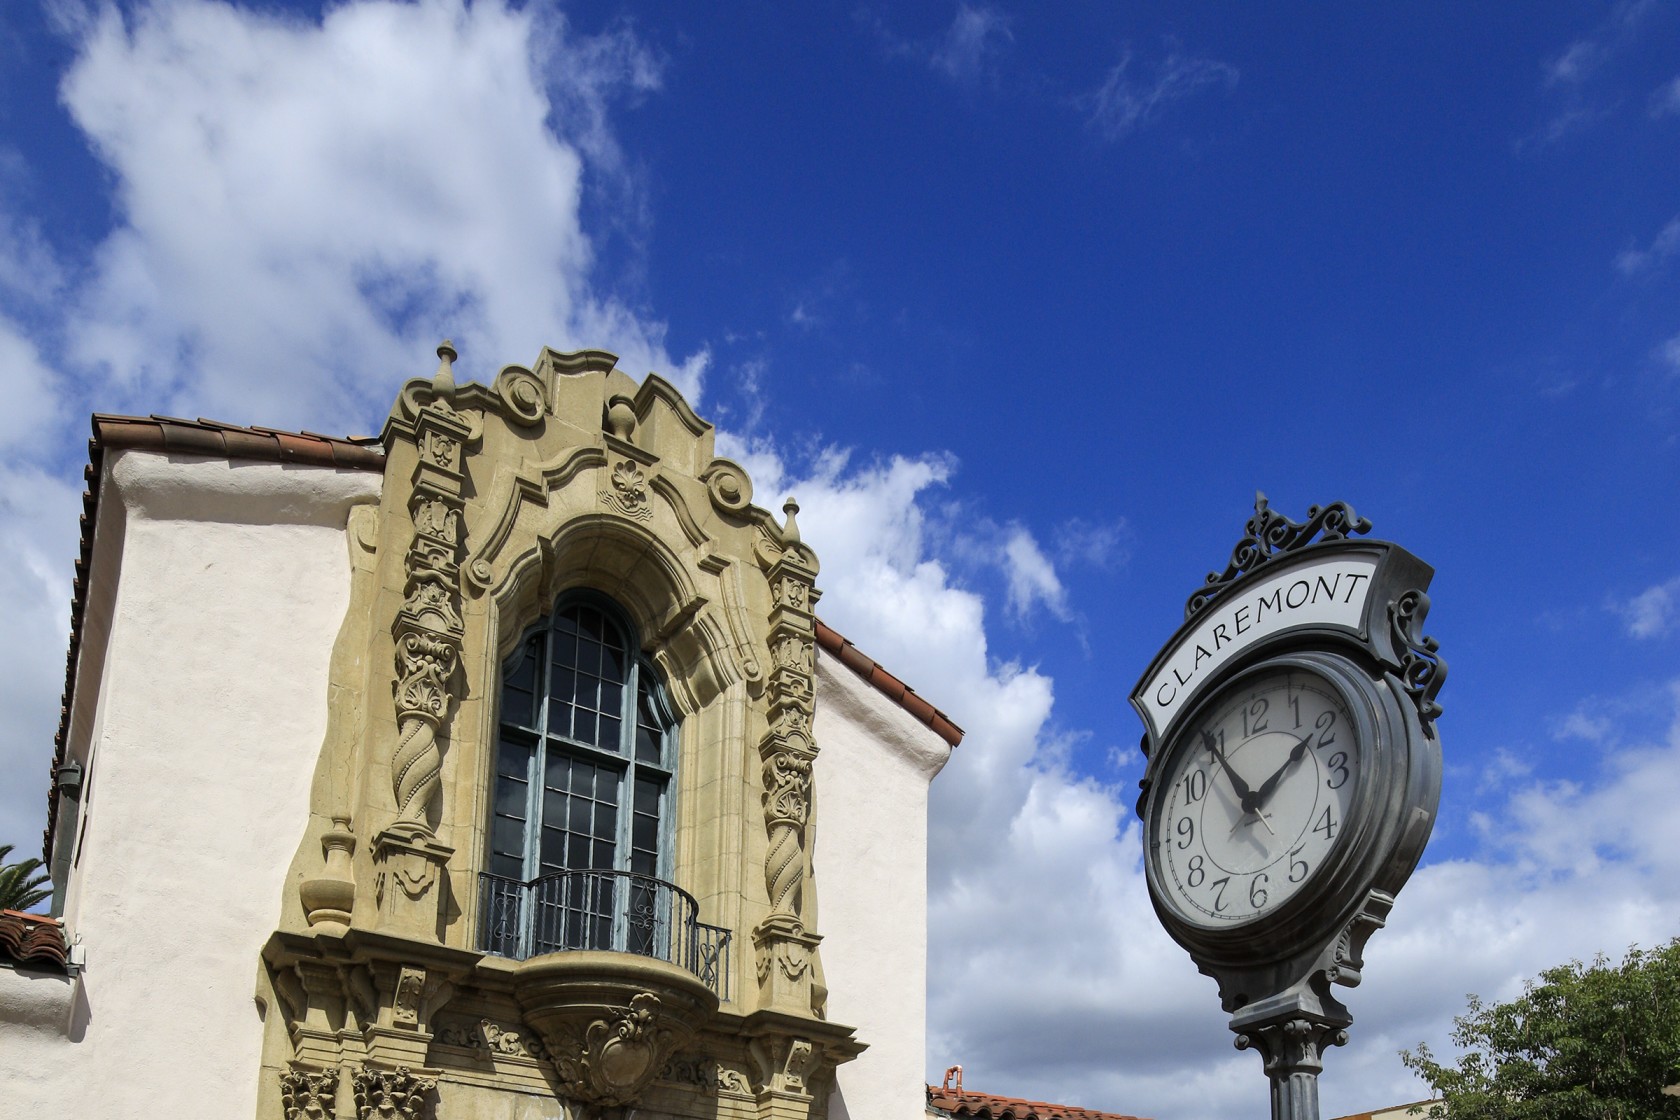 A clock outside a historic building in Claremont.